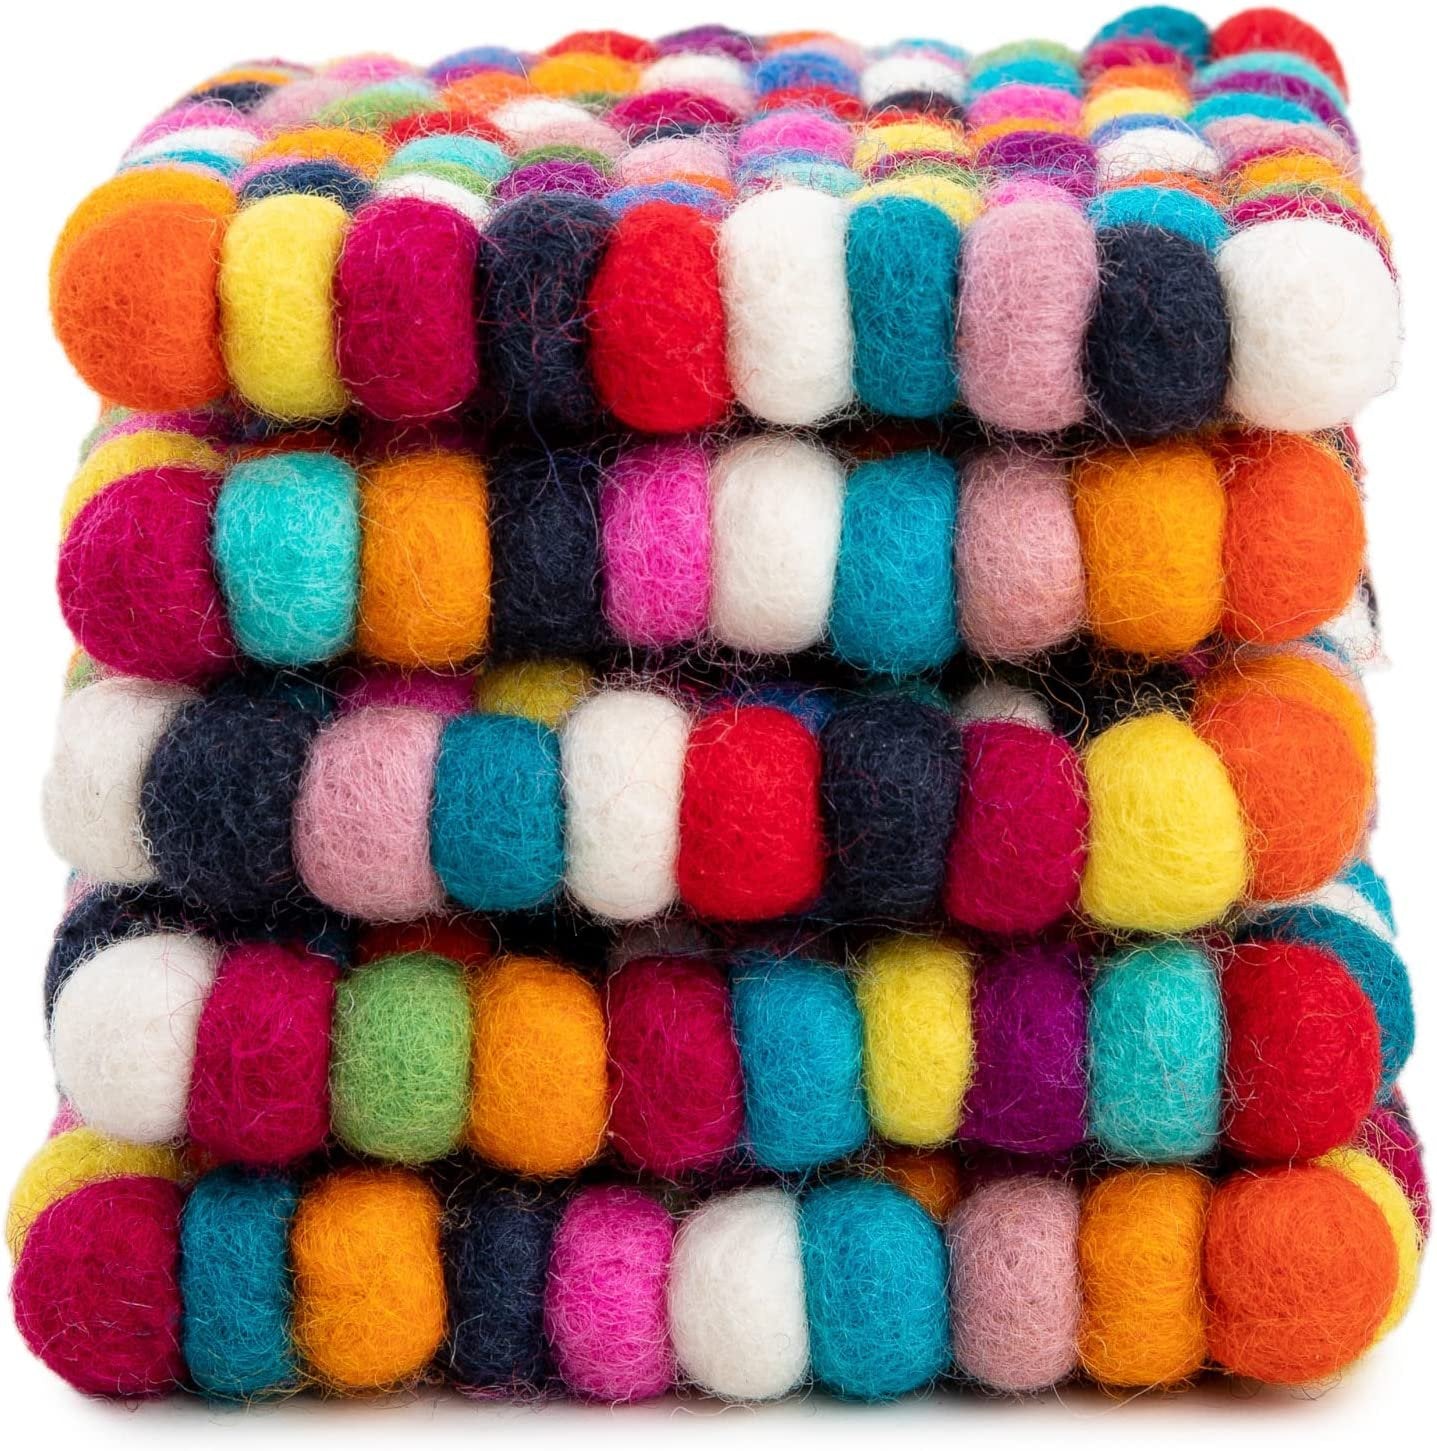 Square Felt Ball Coasters - 100% Merino Wool Table Coasters - Felt Coaster Pads, Absorbent Trivet for Drinks - Heat Resistant, Thick & Durable Hand Felted in Nepal by Woolygon- Multicolor - Set of 5